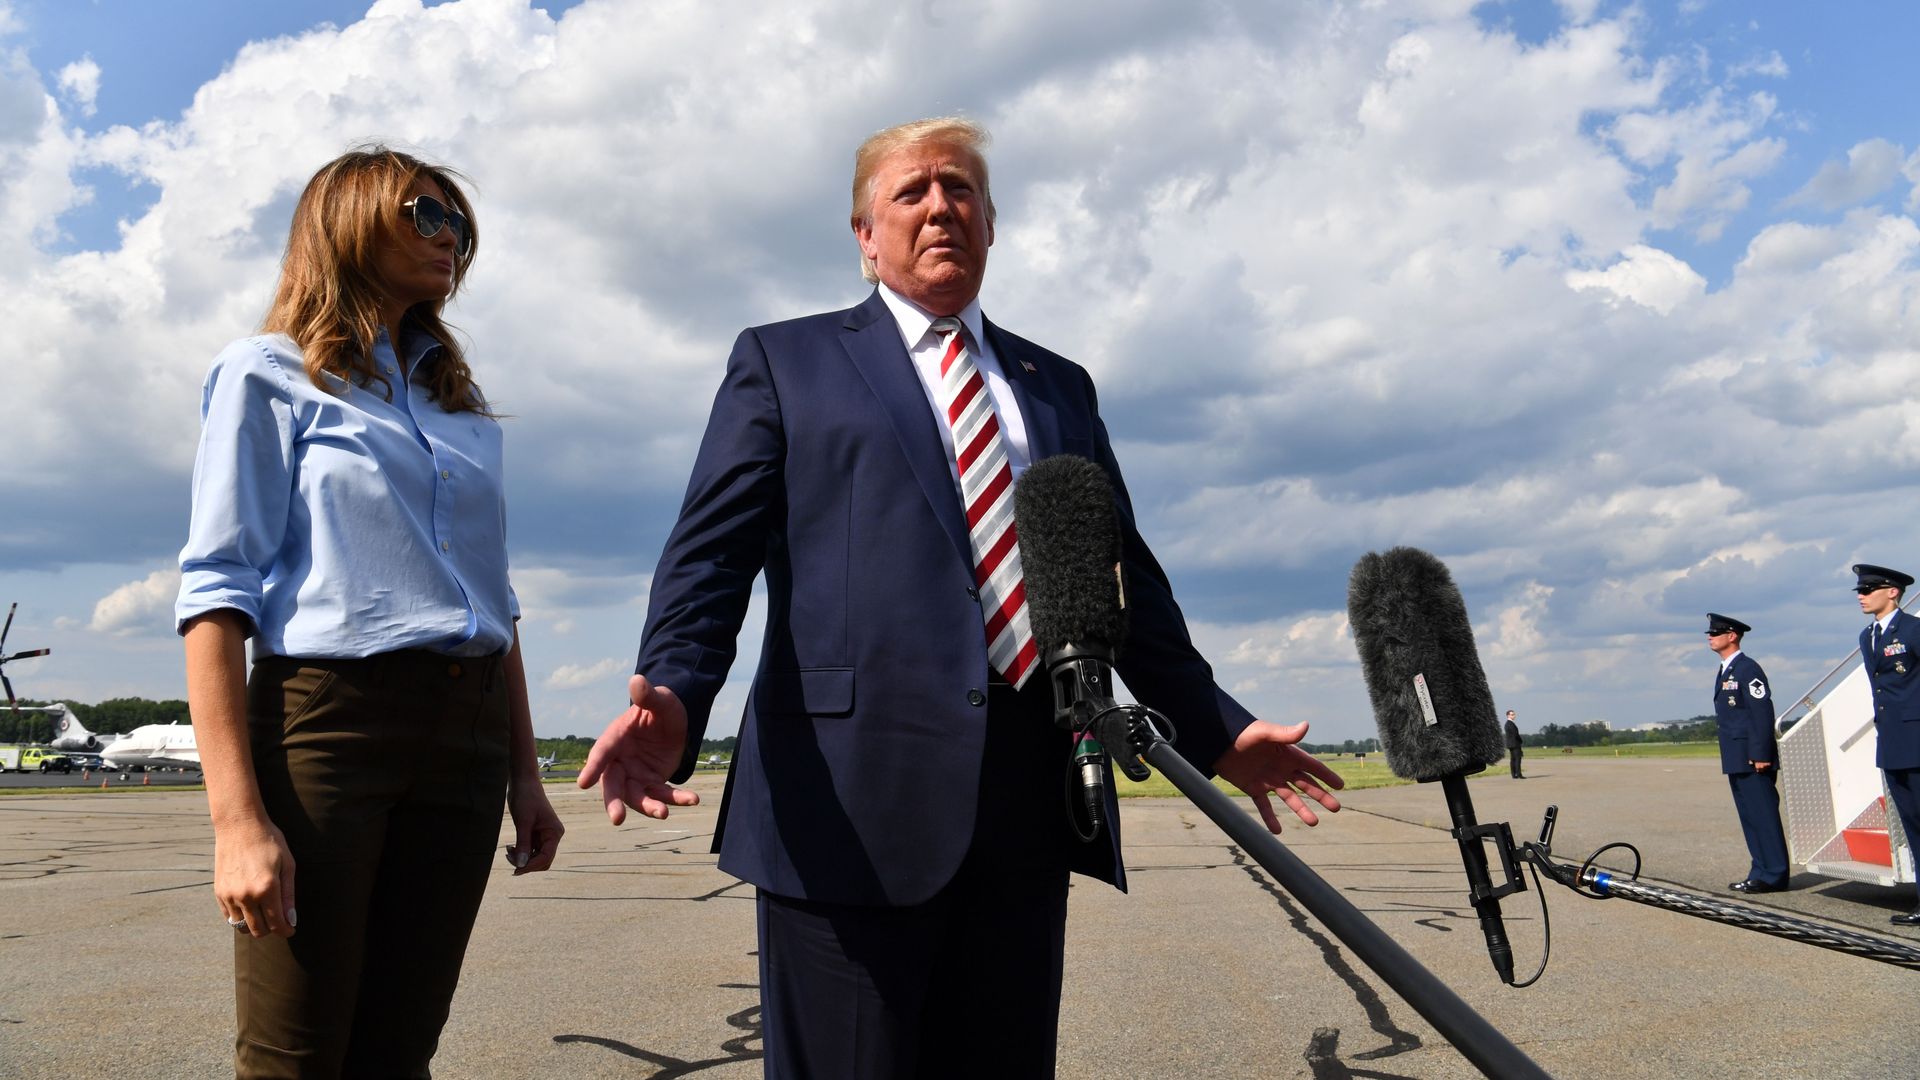 President Donald Trump gives a statement about the recent mass shootings in El Paso and Dayton before boarding to Washington at Morristown Airport on August 04